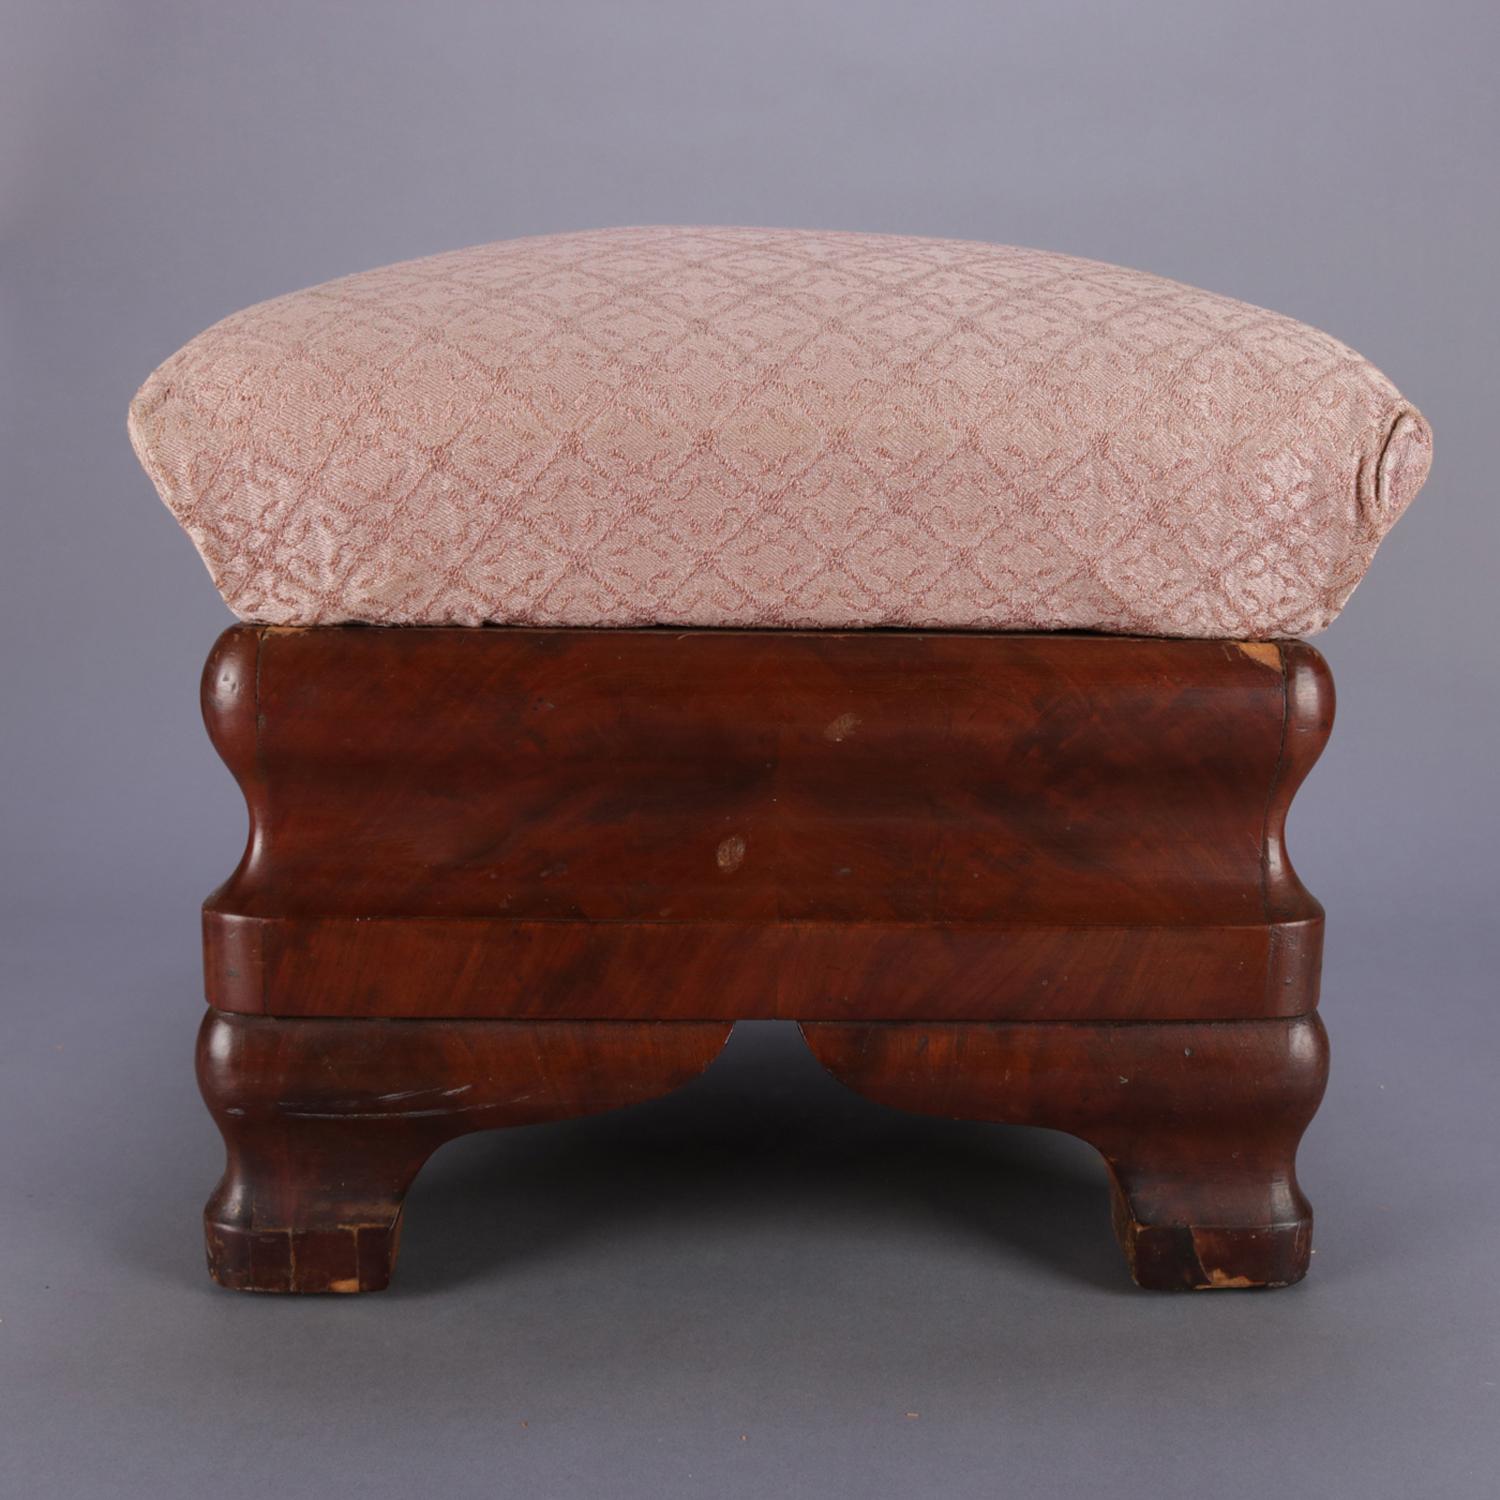 A pair of antique American Empire footstools feature flame mahogany ogee form bases with removable upholstered seats opening to reveal storage compartments, circa 1880

Measure: 14.5